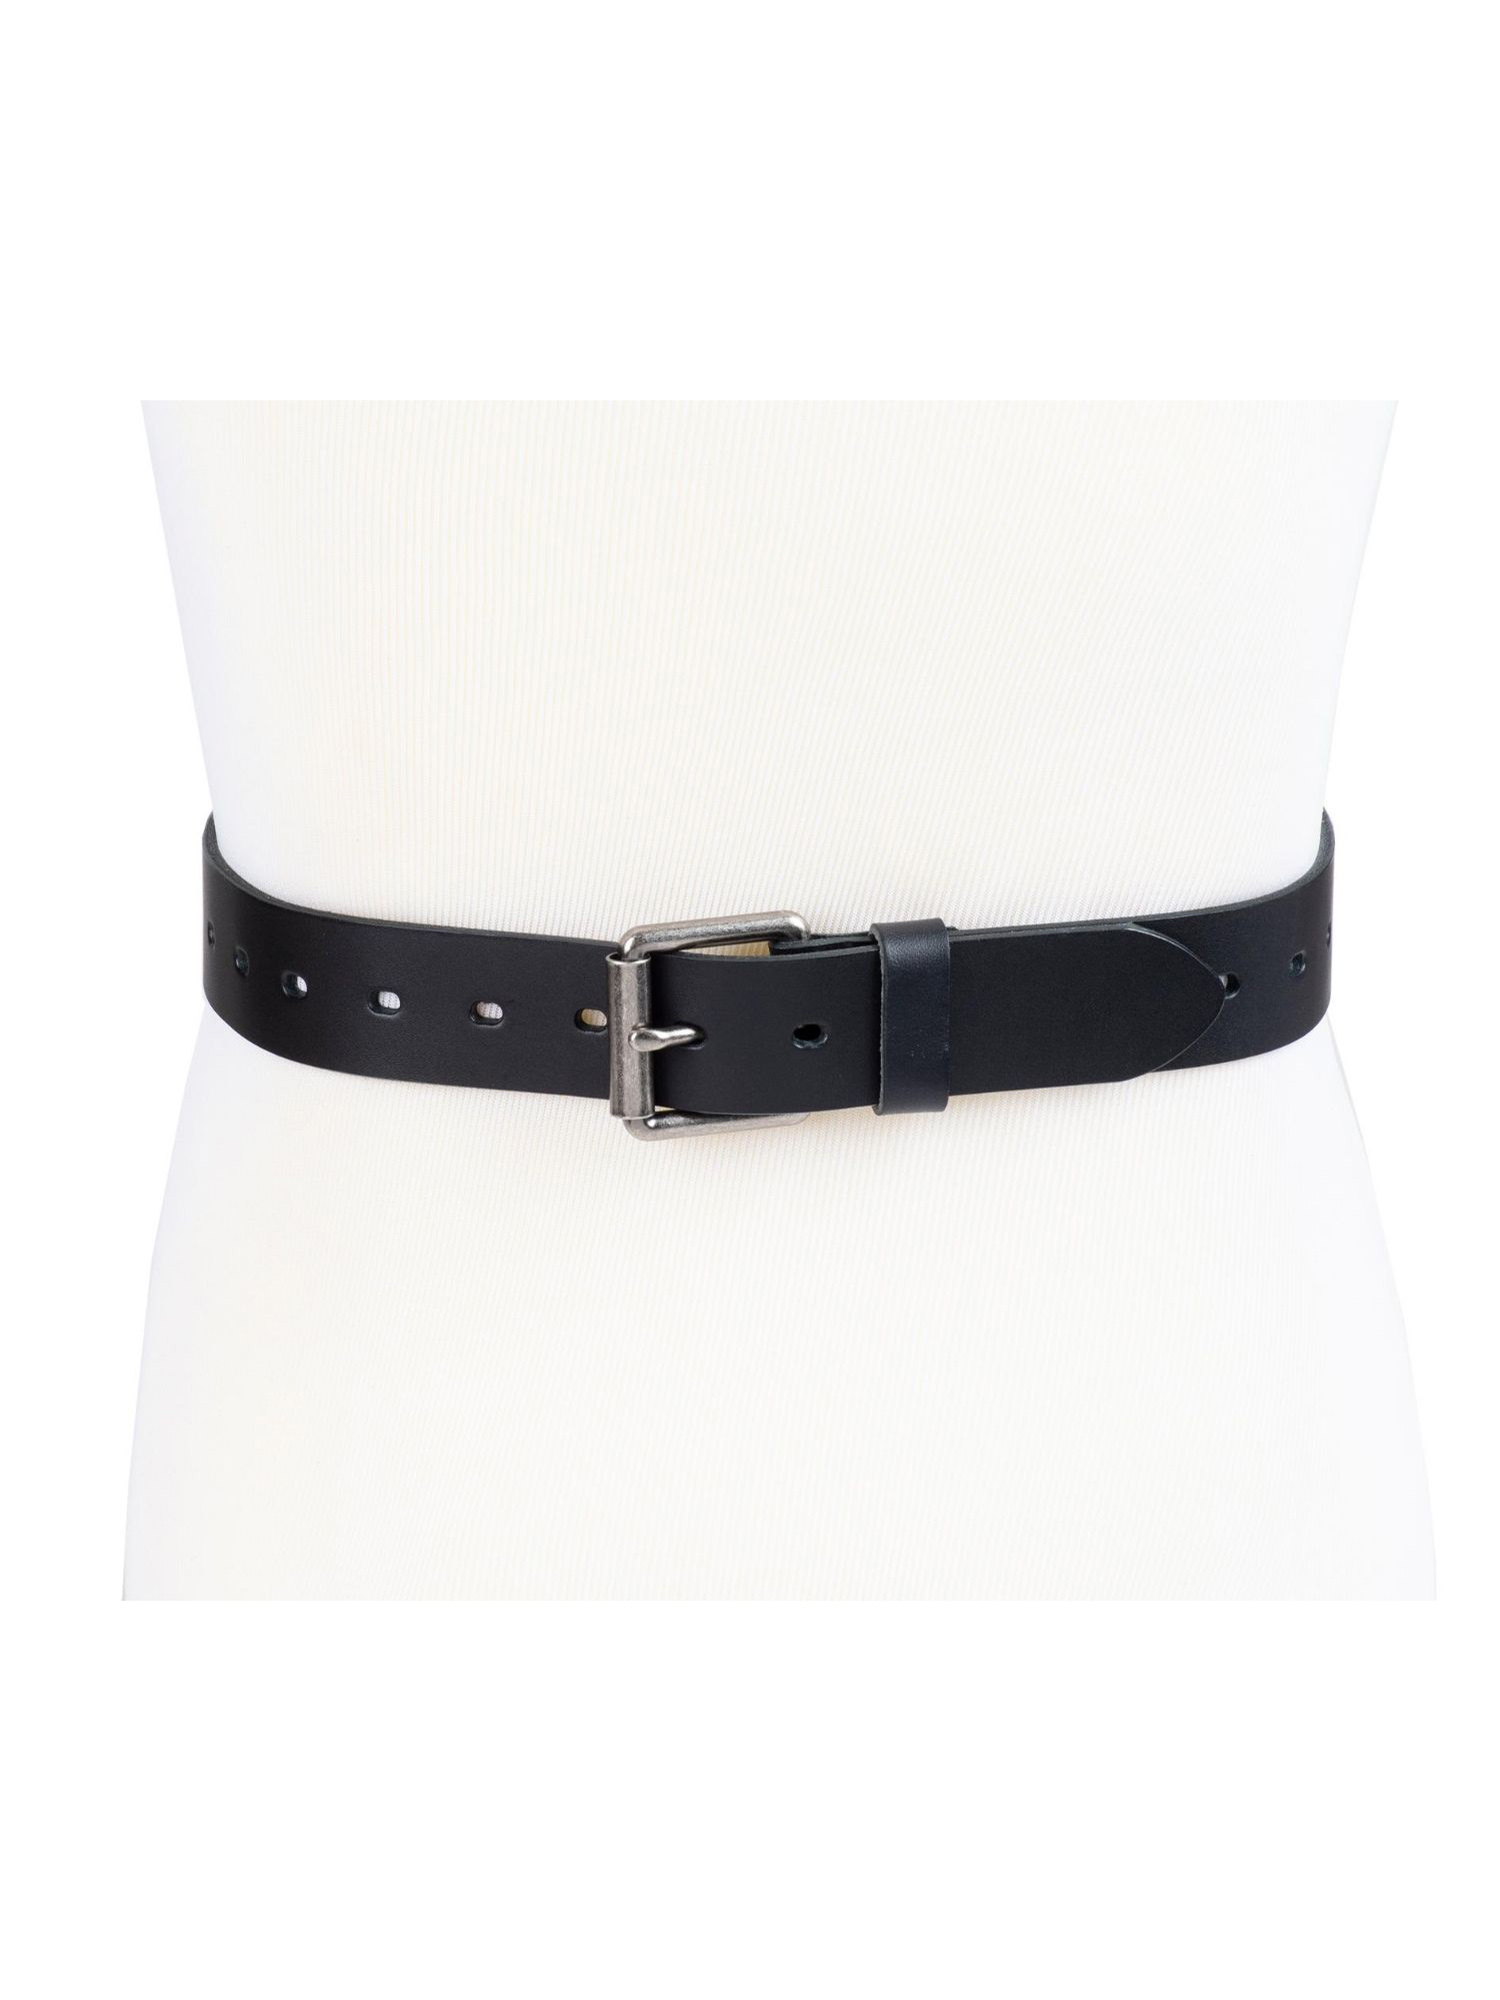 Genuine Dickies Men's Black Fully Adjustable Perforated Leather Belt (Regular and Big & Tall Sizes) - image 5 of 6